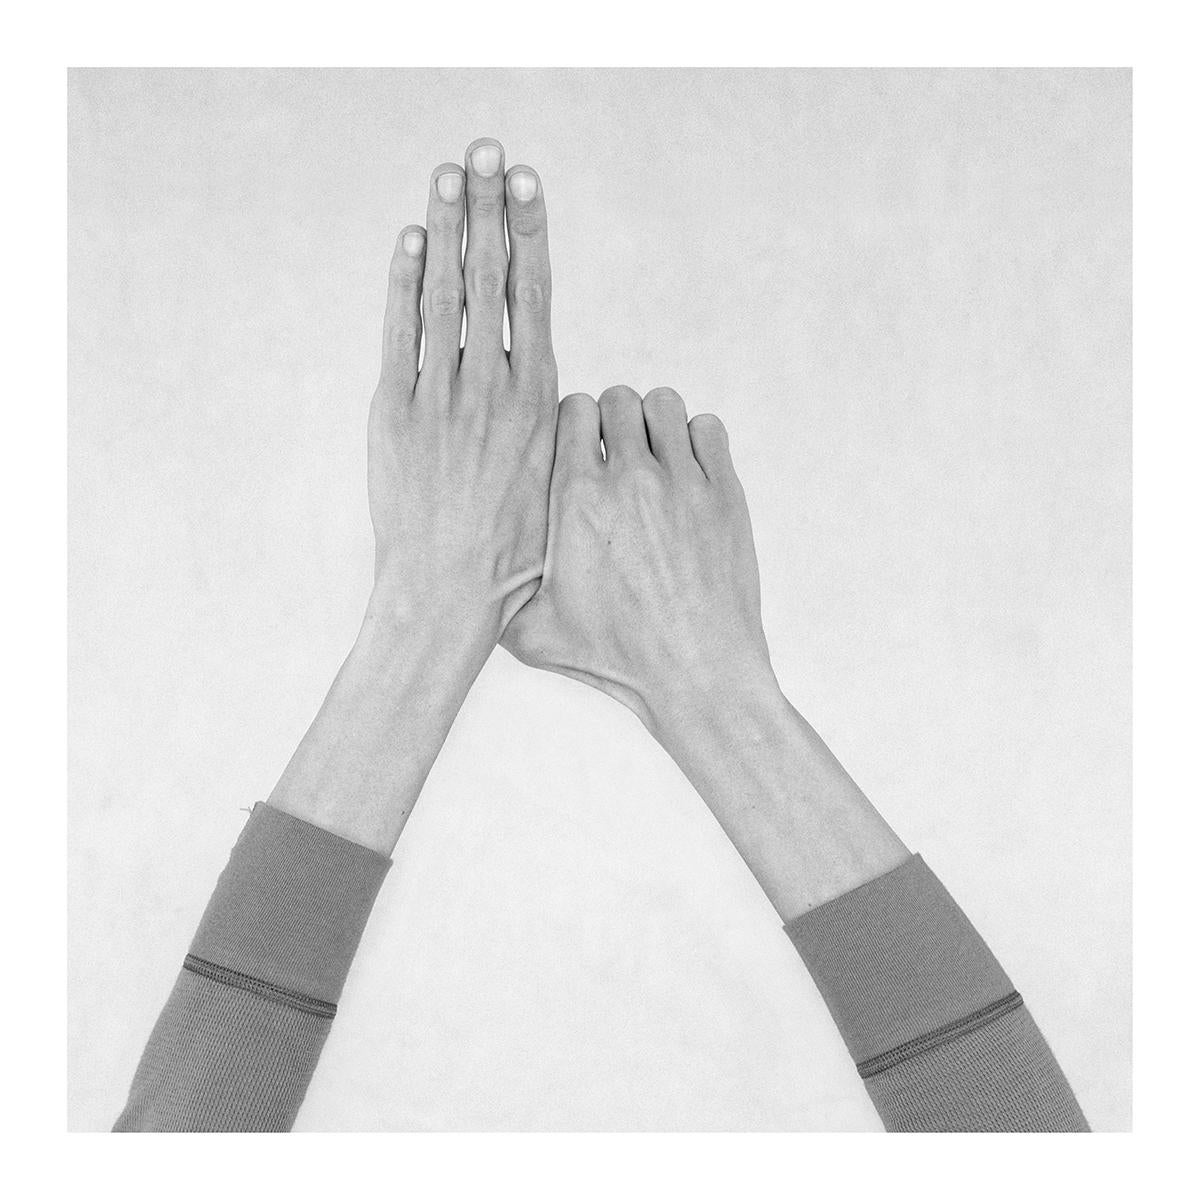 Untitled XXXVIII From the Series Chiromorphose. Hands. Black & White Photography